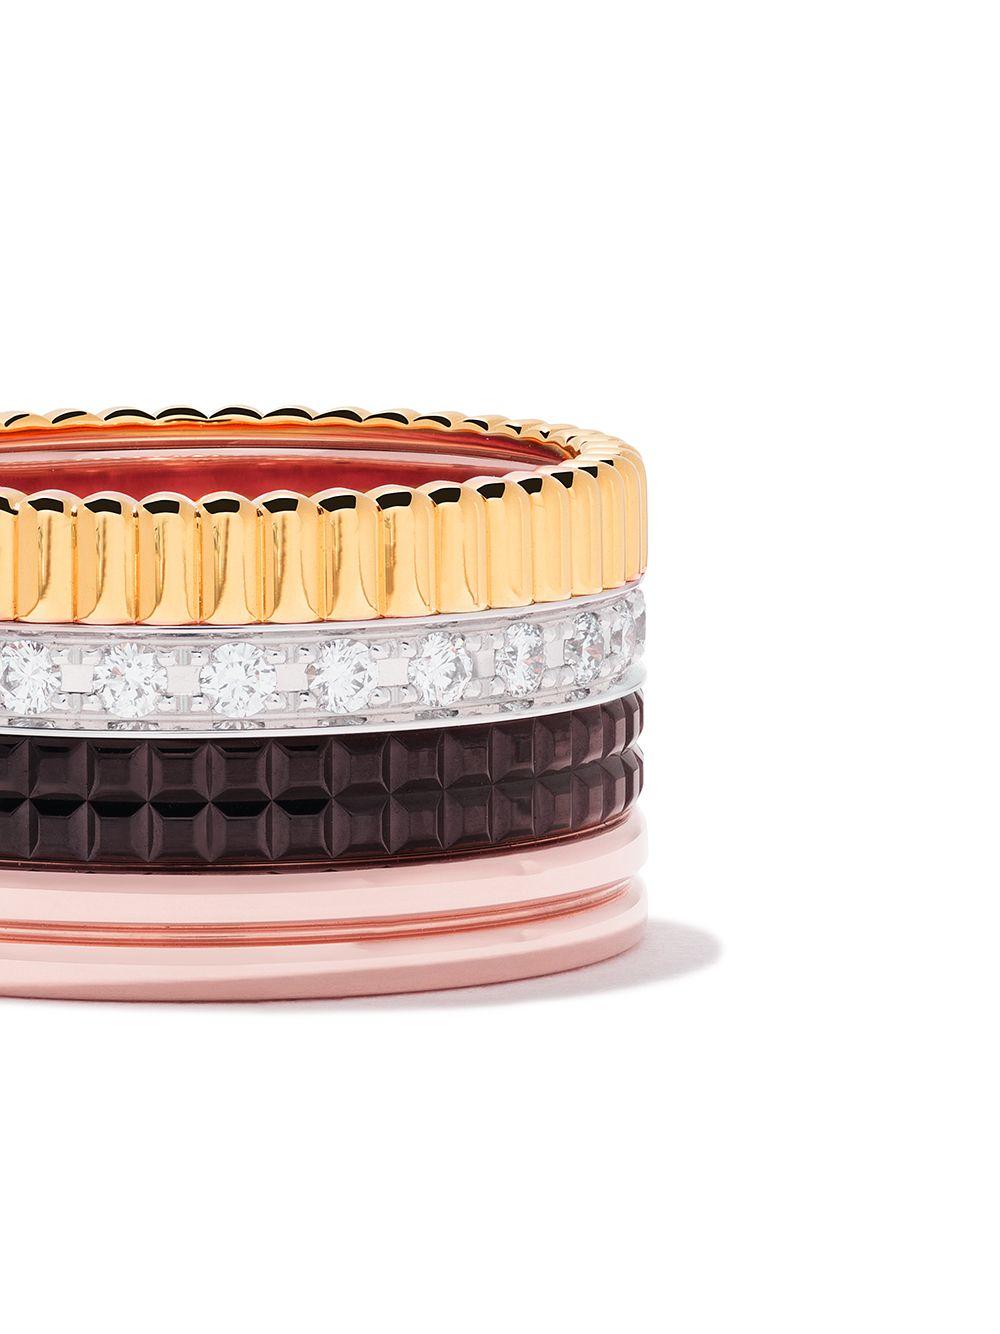 Band ring set with pavé diamonds, in yellow, white, pink gold and brown PVD.

In its original version, the Quatre ring is a genuine emblem of the Maison Boucheron. Each gold band represents one of the Maison’s codes and expresses the talent of its